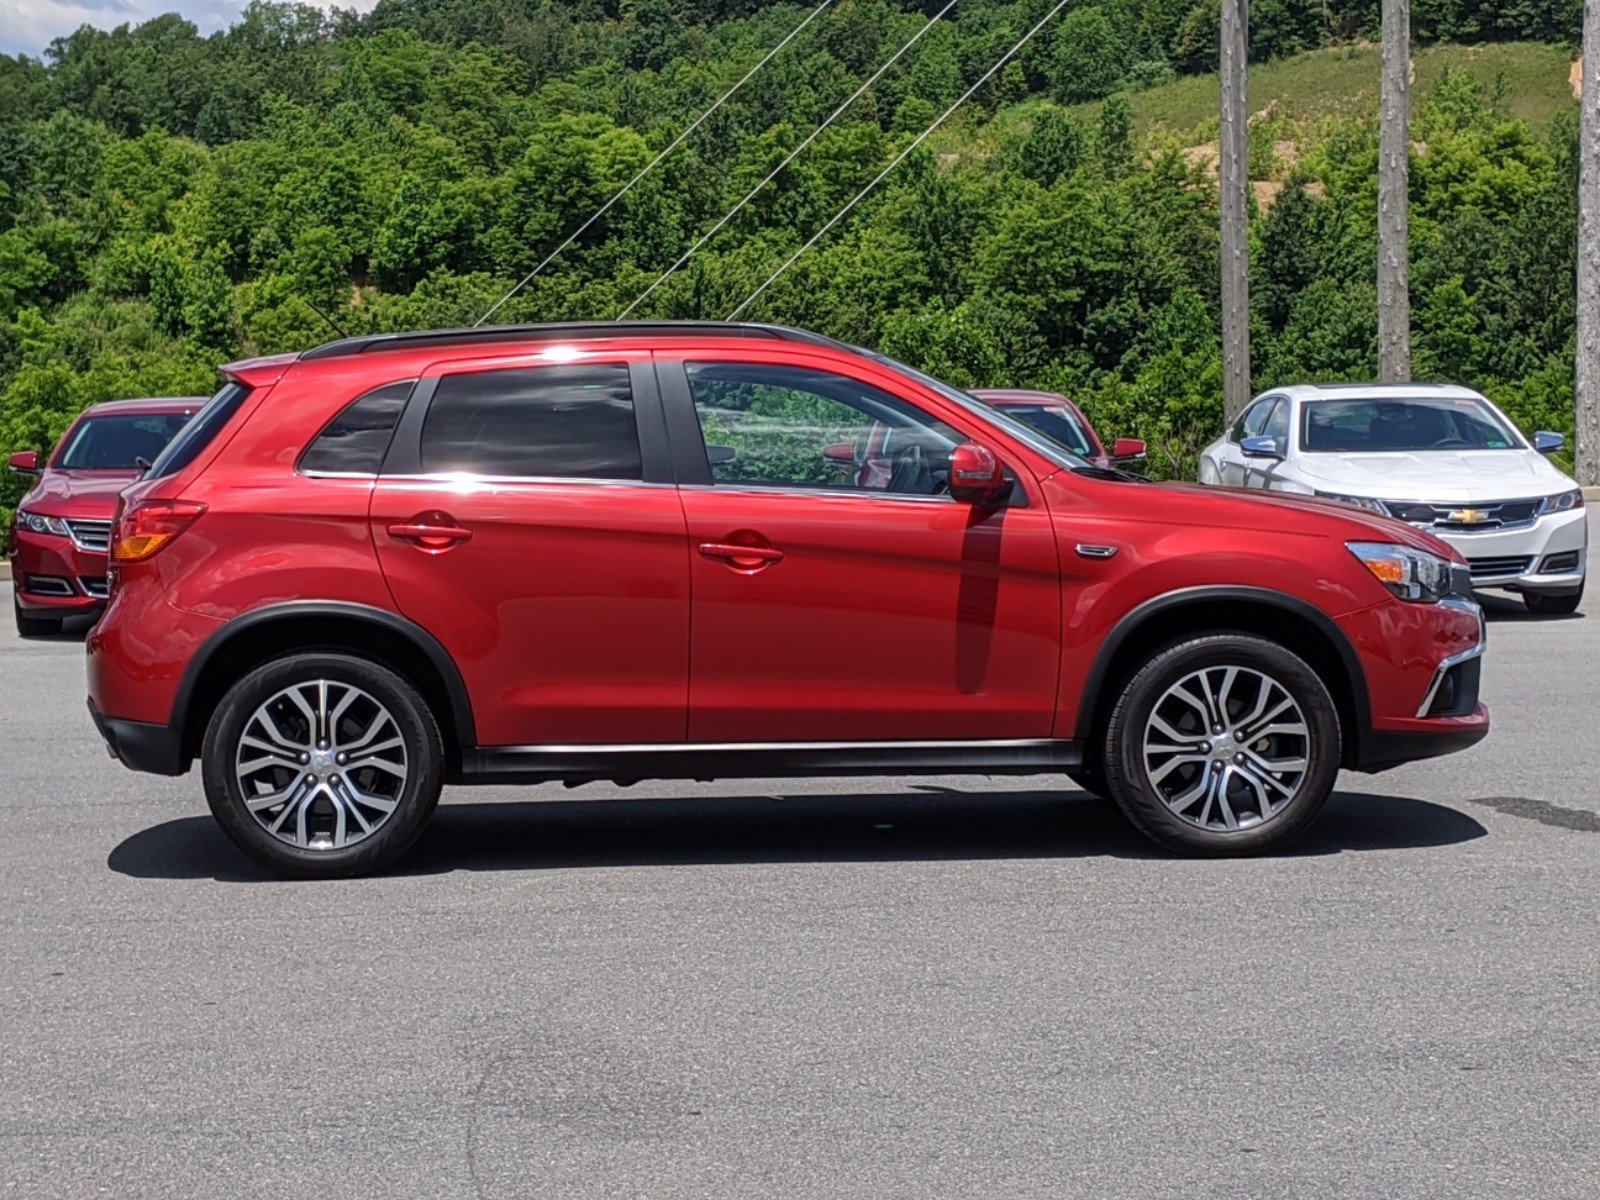 PreOwned 2016 Mitsubishi Outlander Sport 2.4 GT 4WD